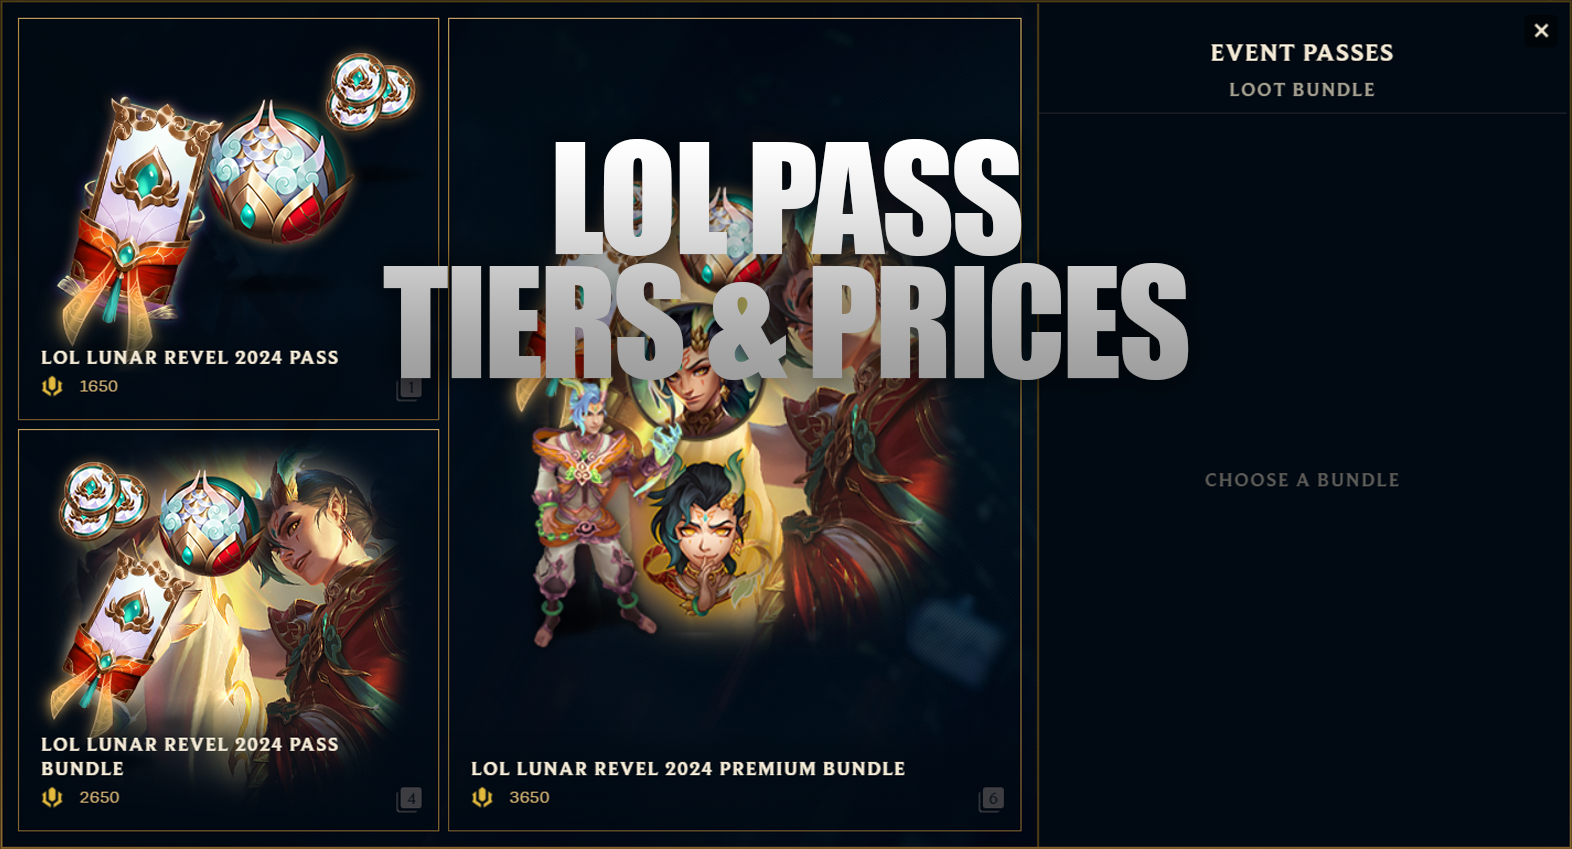 There are three tiers available for the LoL Lunar Revel 2024 event pass, each with increasing rewards.